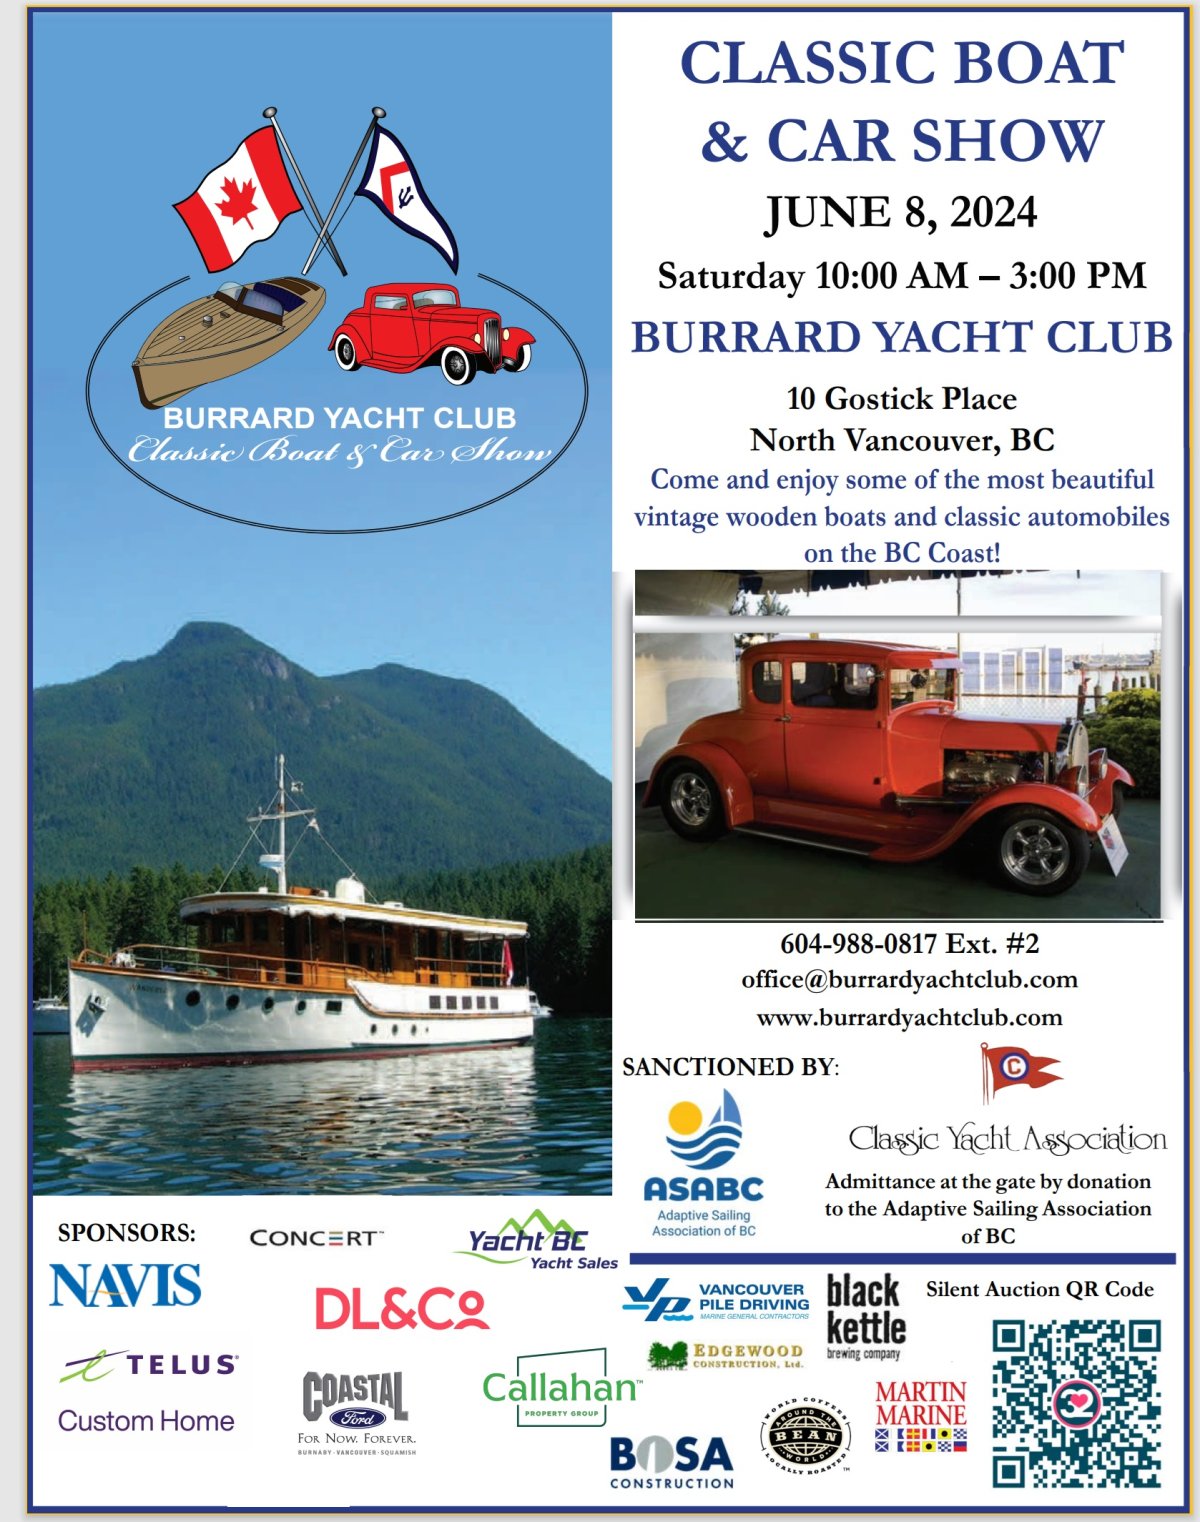 Burrard Yacht Club Classic Boat and Car Show - image